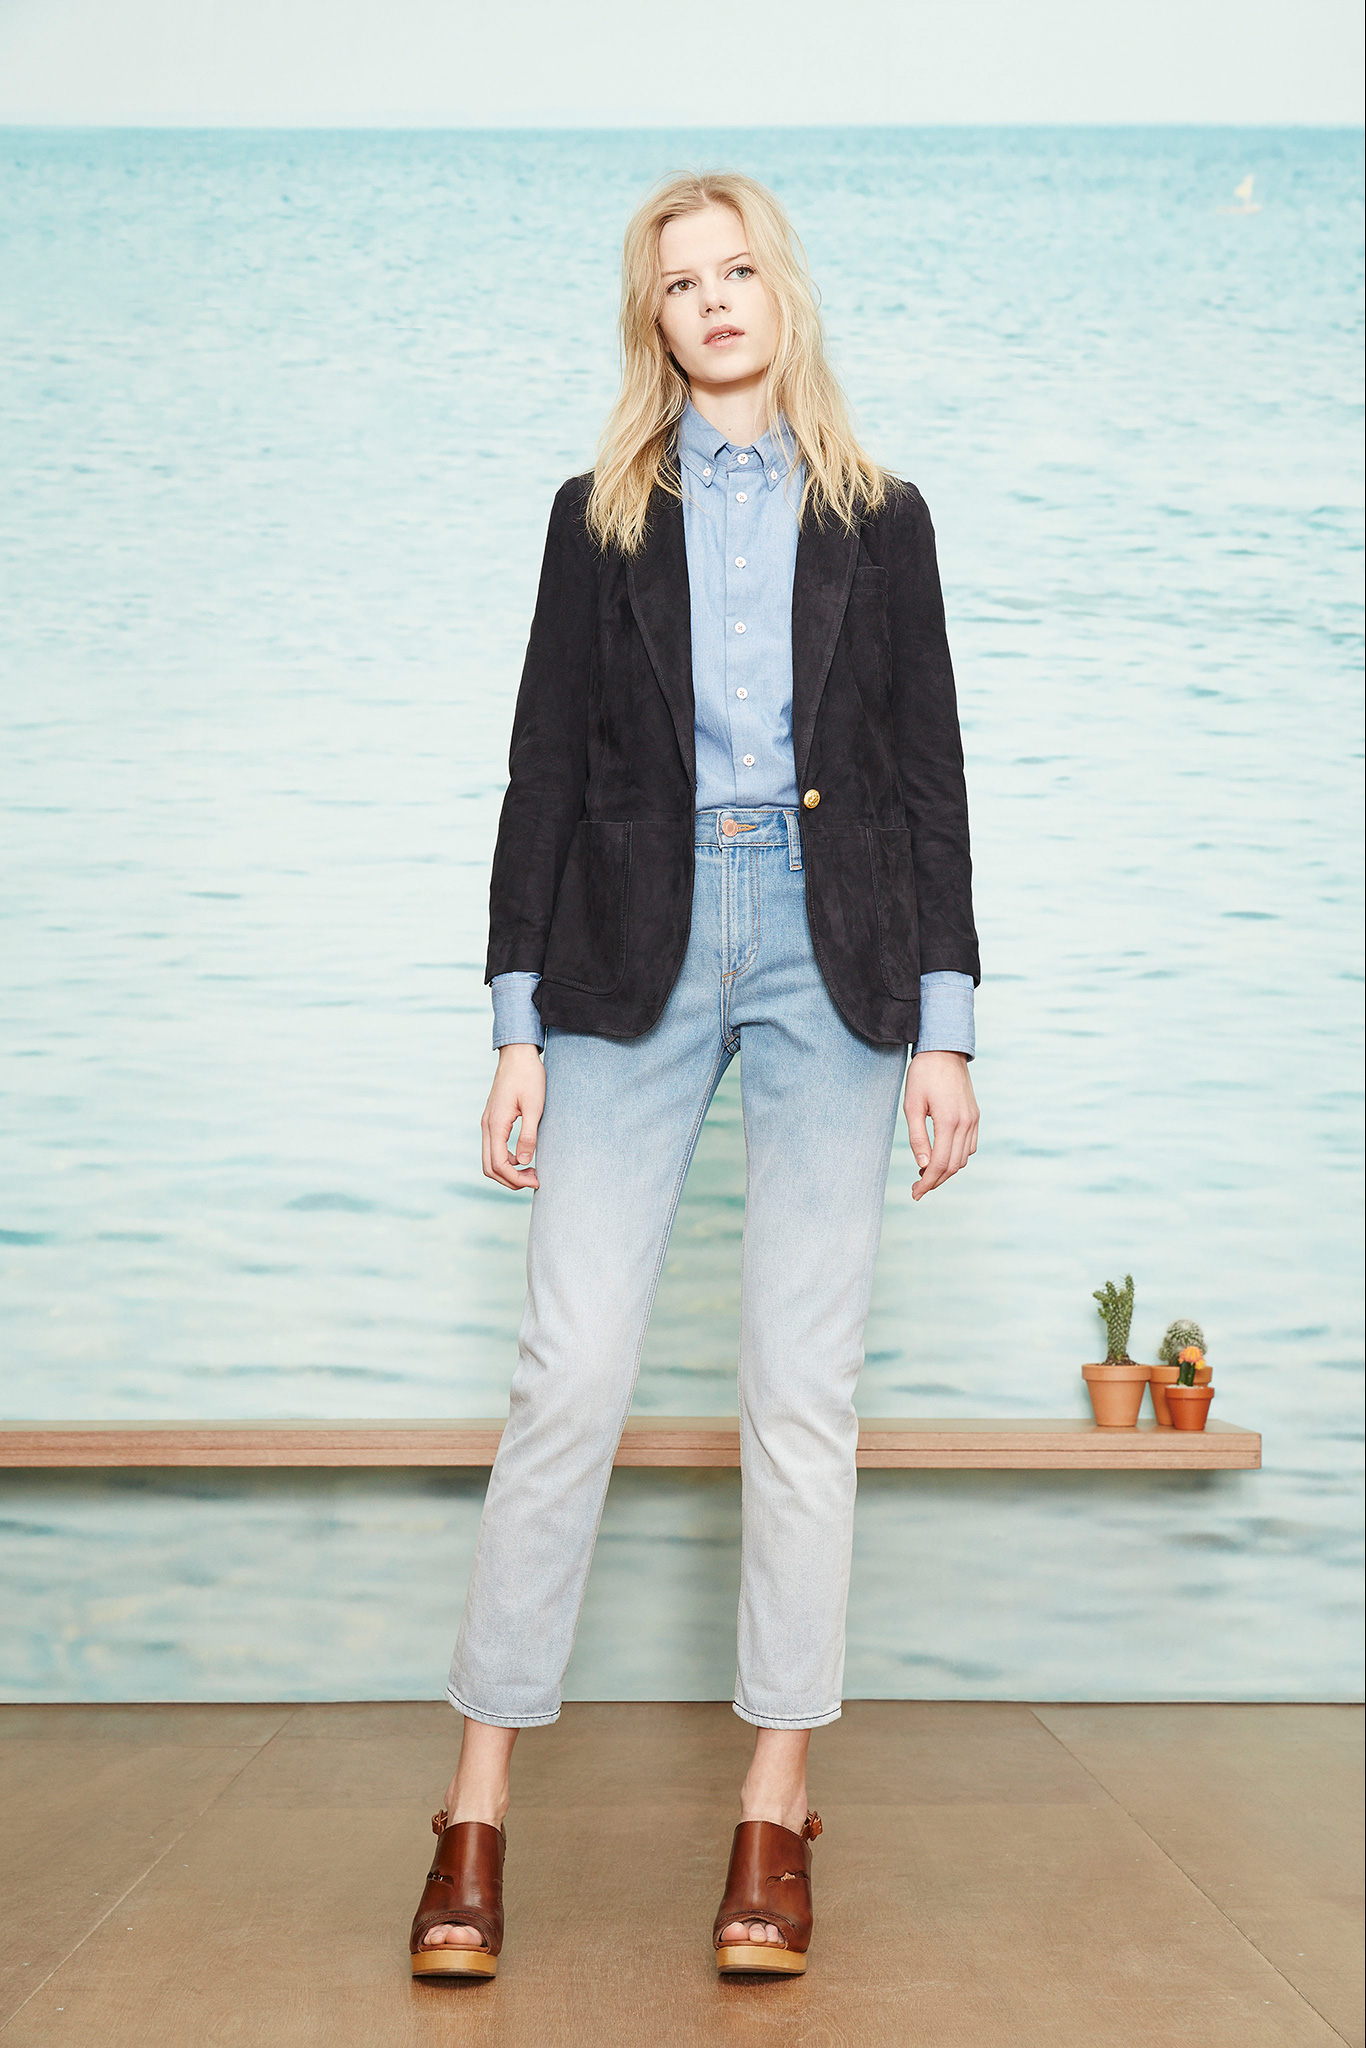 Band of Outsiders pre-fall 2015 lookbook